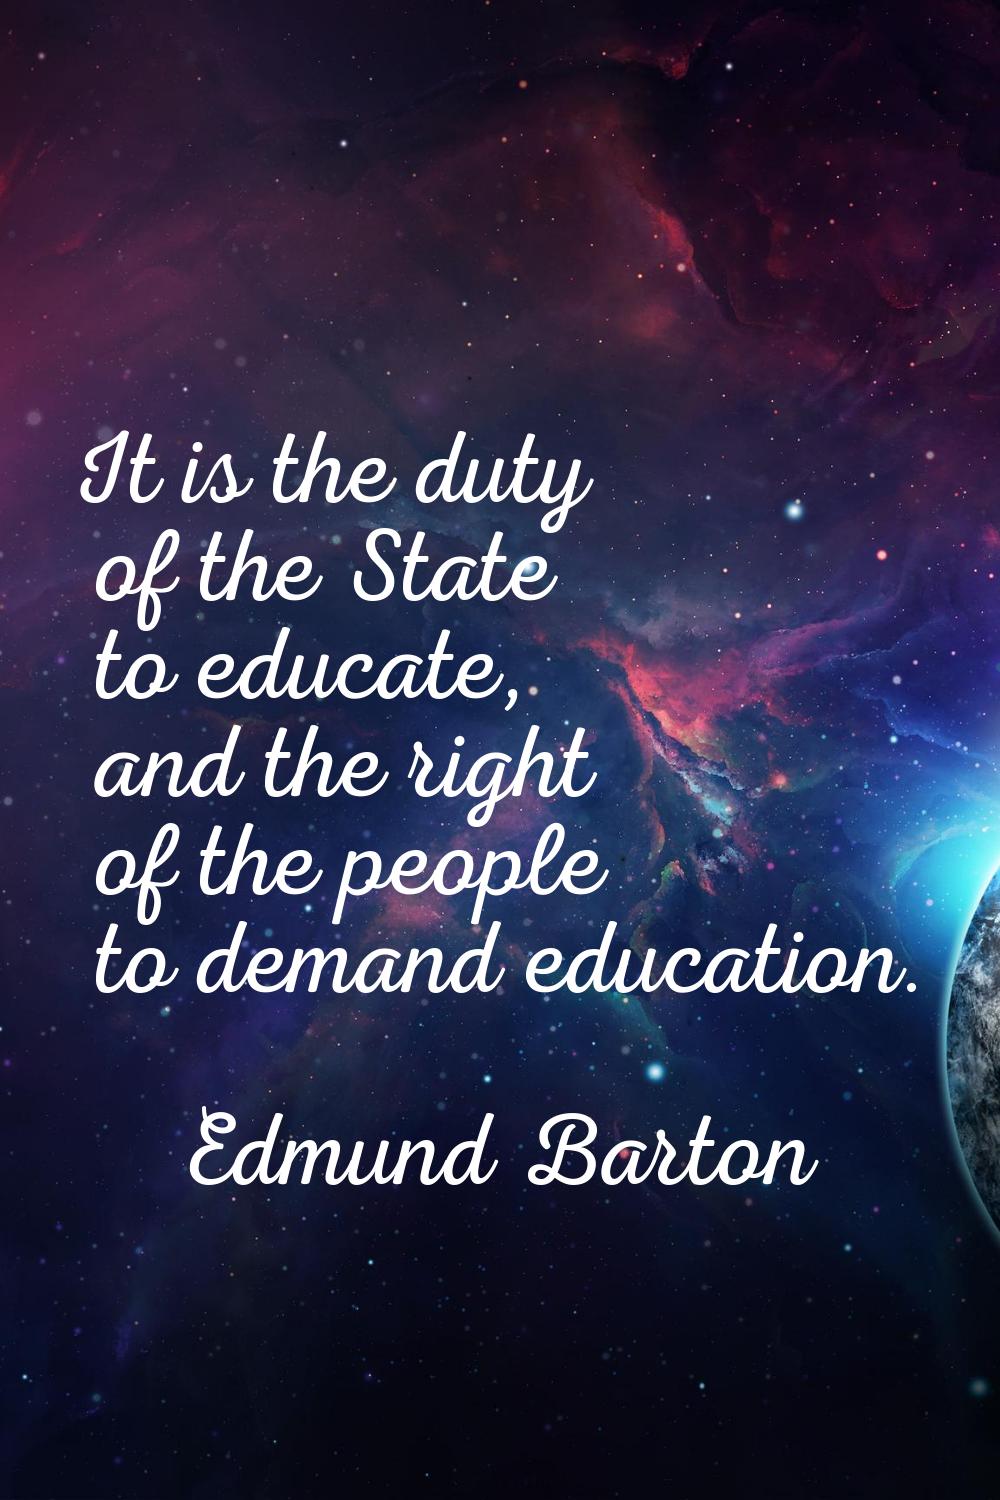 It is the duty of the State to educate, and the right of the people to demand education.